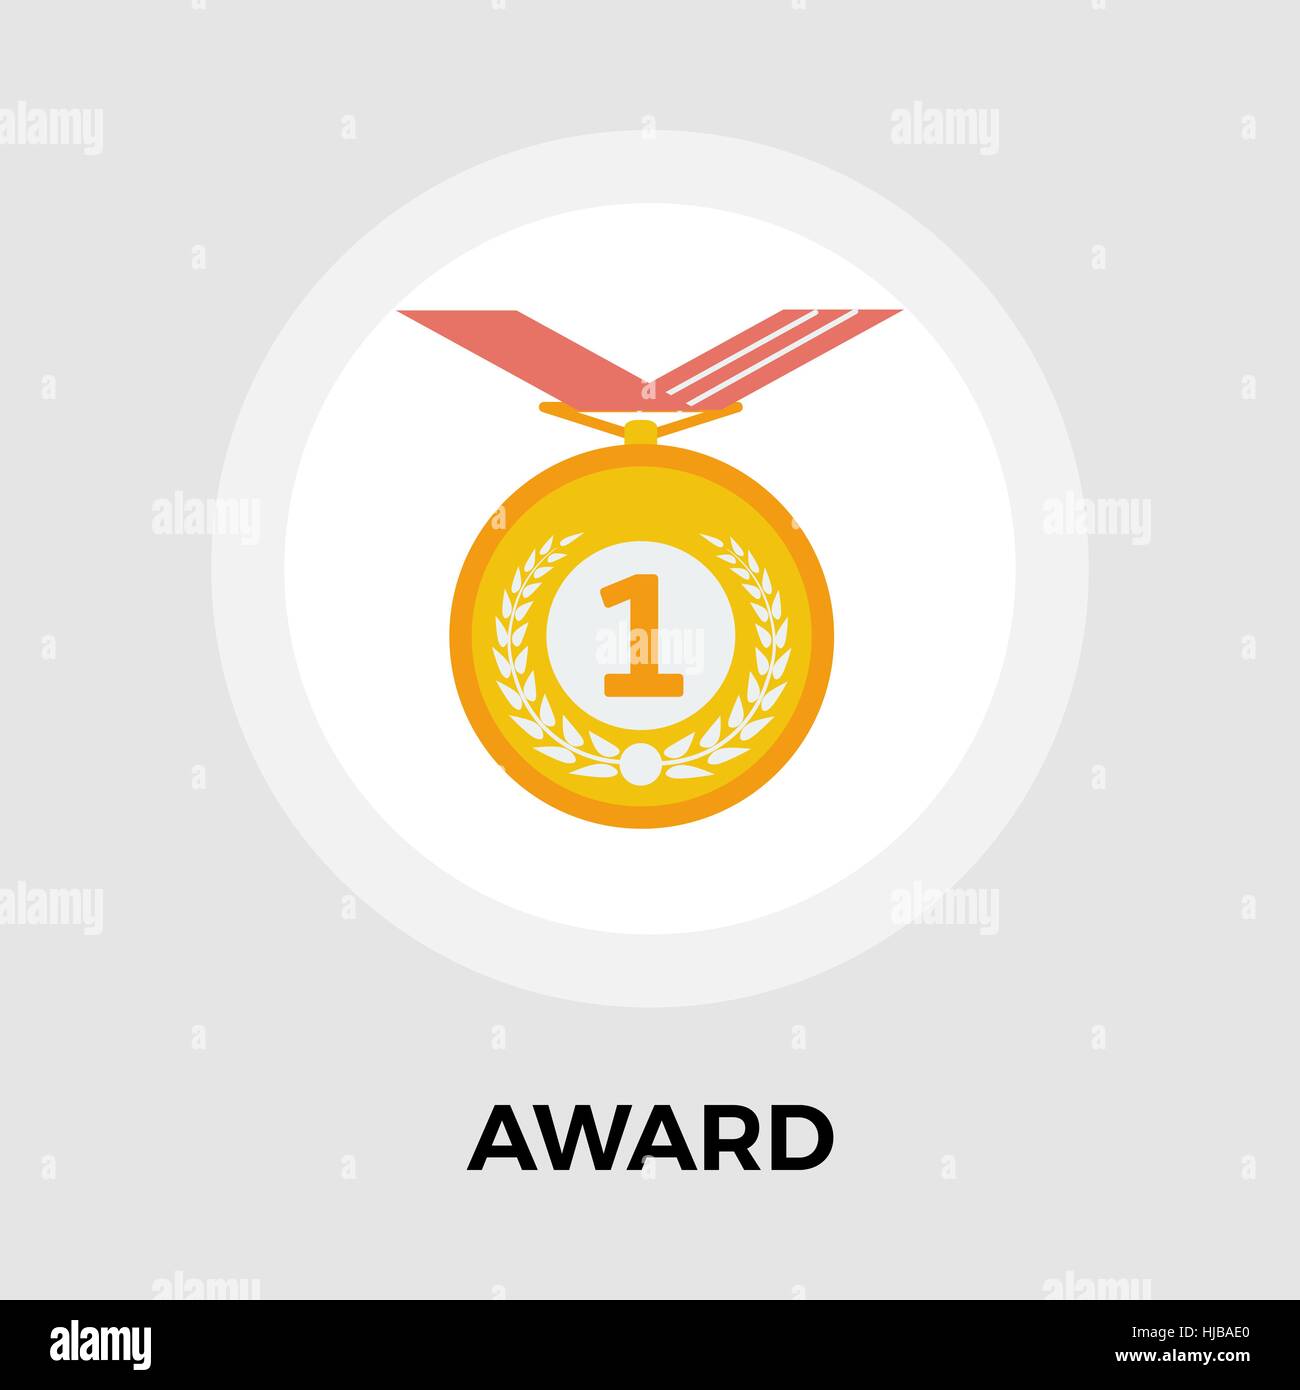 Award Icon Vector. Flat icon isolated on the white background. Editable EPS file. Vector illustration. Stock Vector